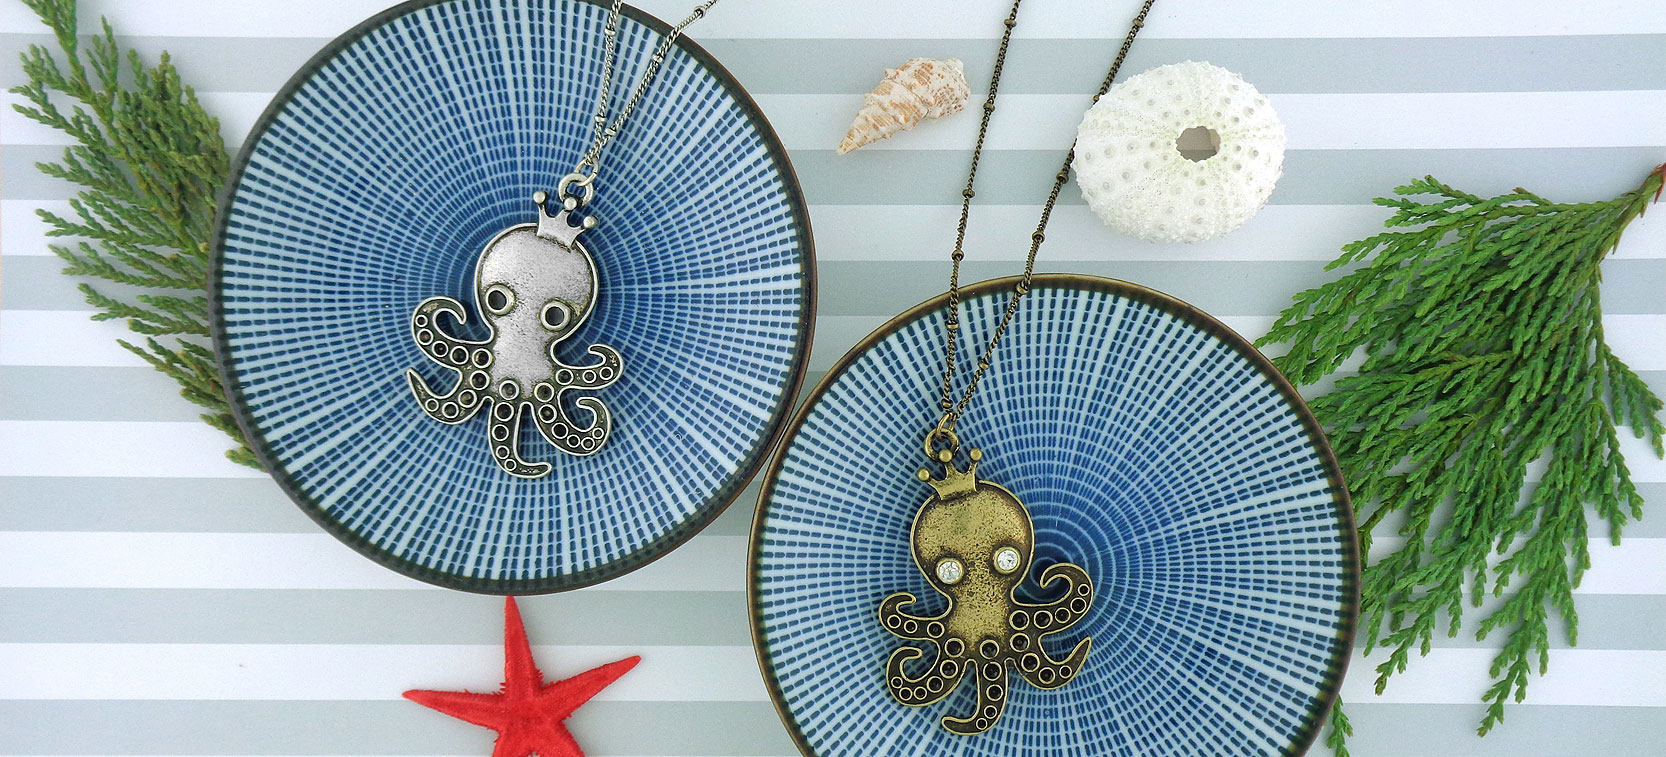 LAVISHY design and wholesale octopus themed vegan accessories and gfits to gift shops, boutiques and book stores in Canada, USA and worldwide.